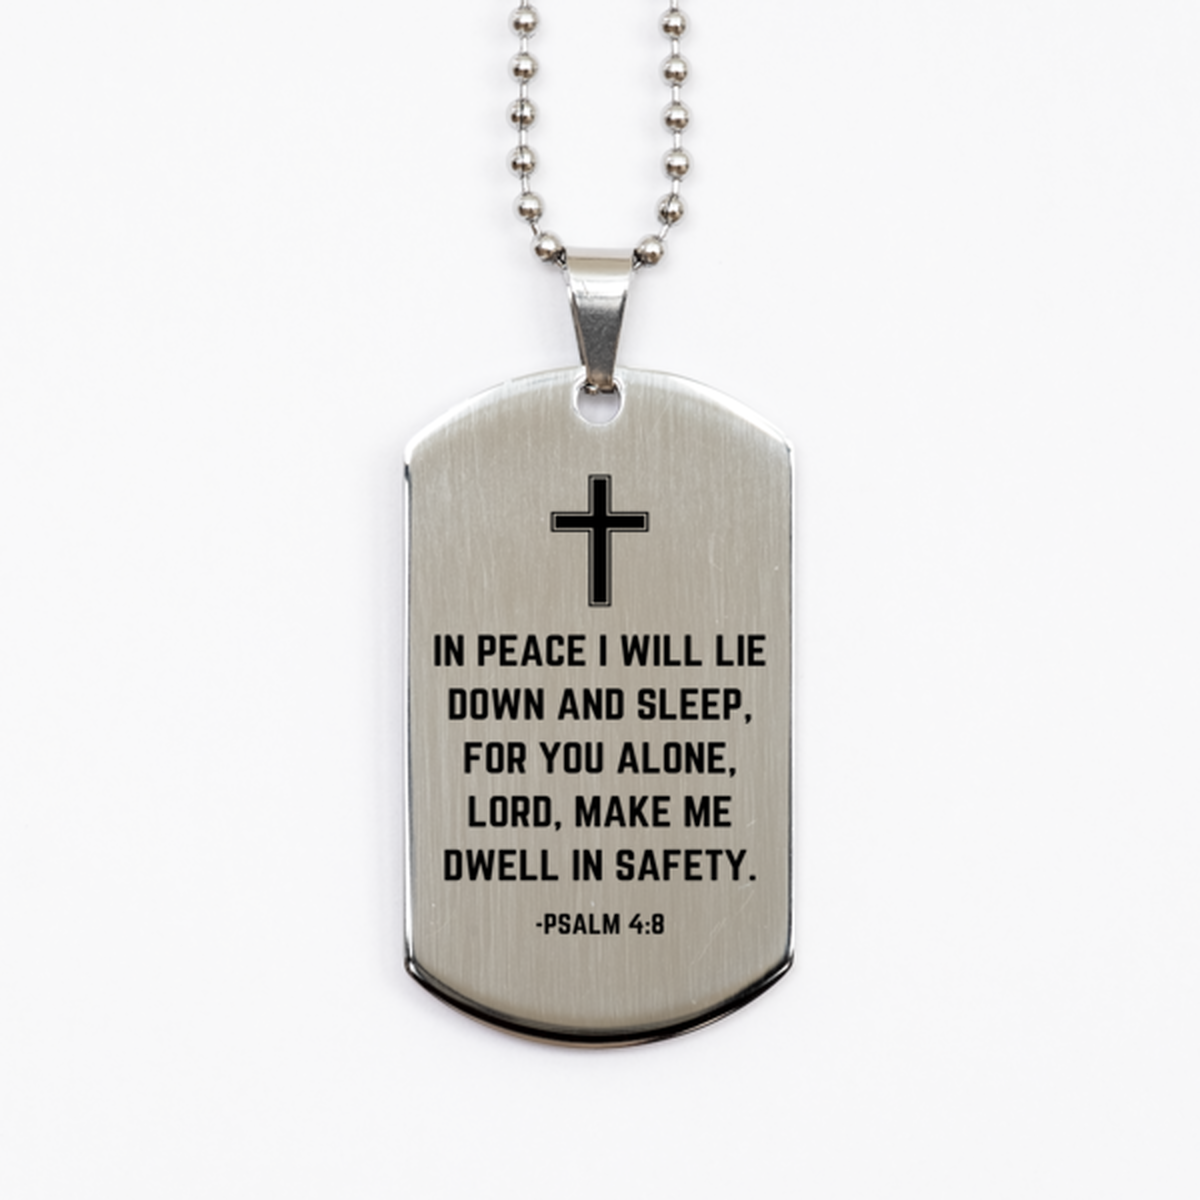 Baptism Gifts For Teenage Boys Girls, Christian Bible Verse Silver Dog Tag, In peace I will lie down and sleep, Confirmation Gifts, Bible Verse Necklace for Son, Godson, Grandson, Nephew